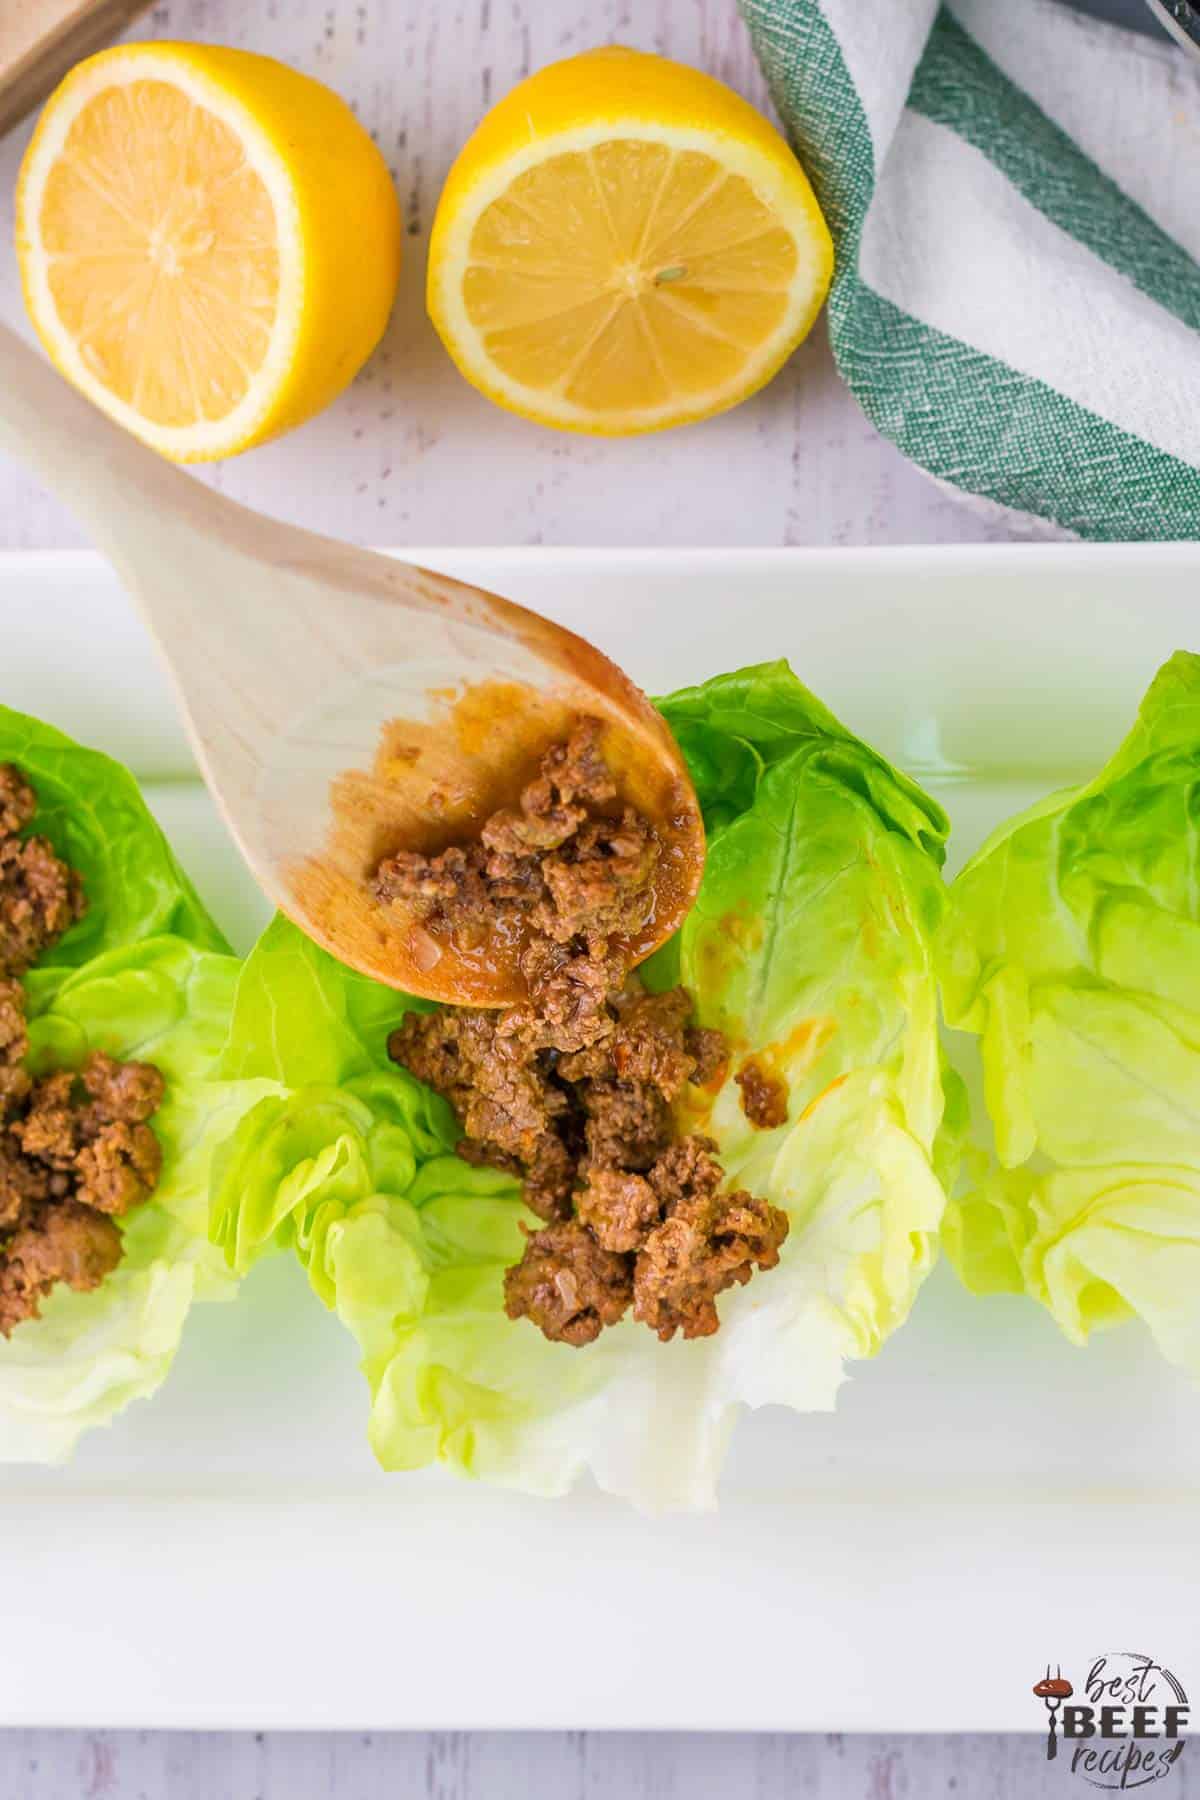 Portioning beef into lettuce wraps recipe